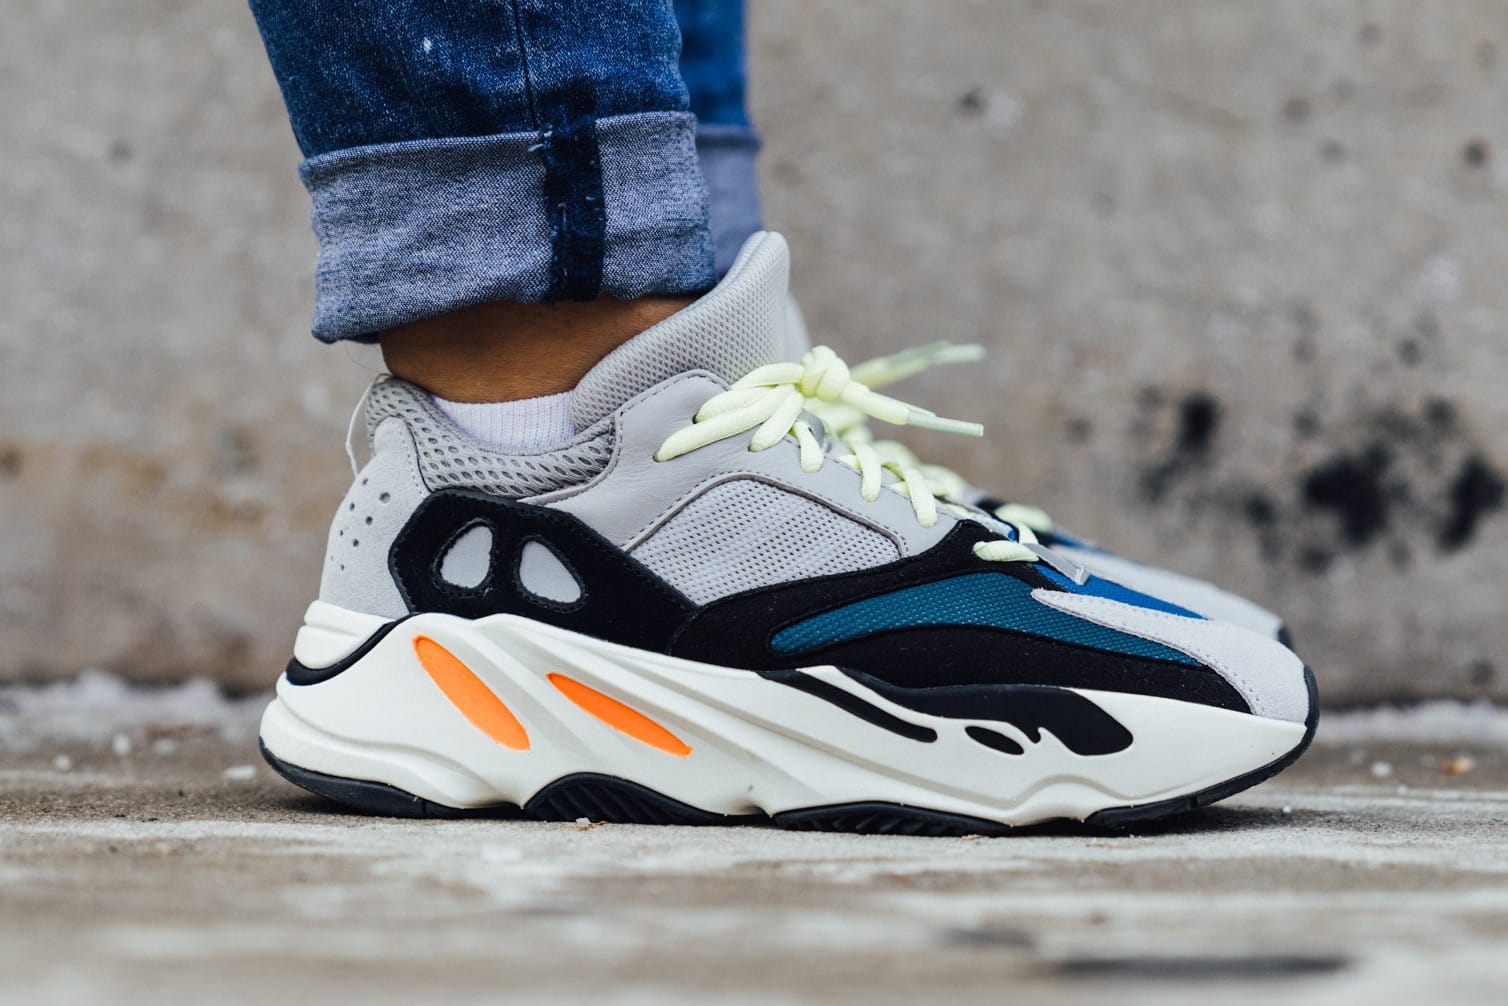 Adidas Yeezy 700 Wave Runner Restock Cheap Sale, UP TO 65% OFF